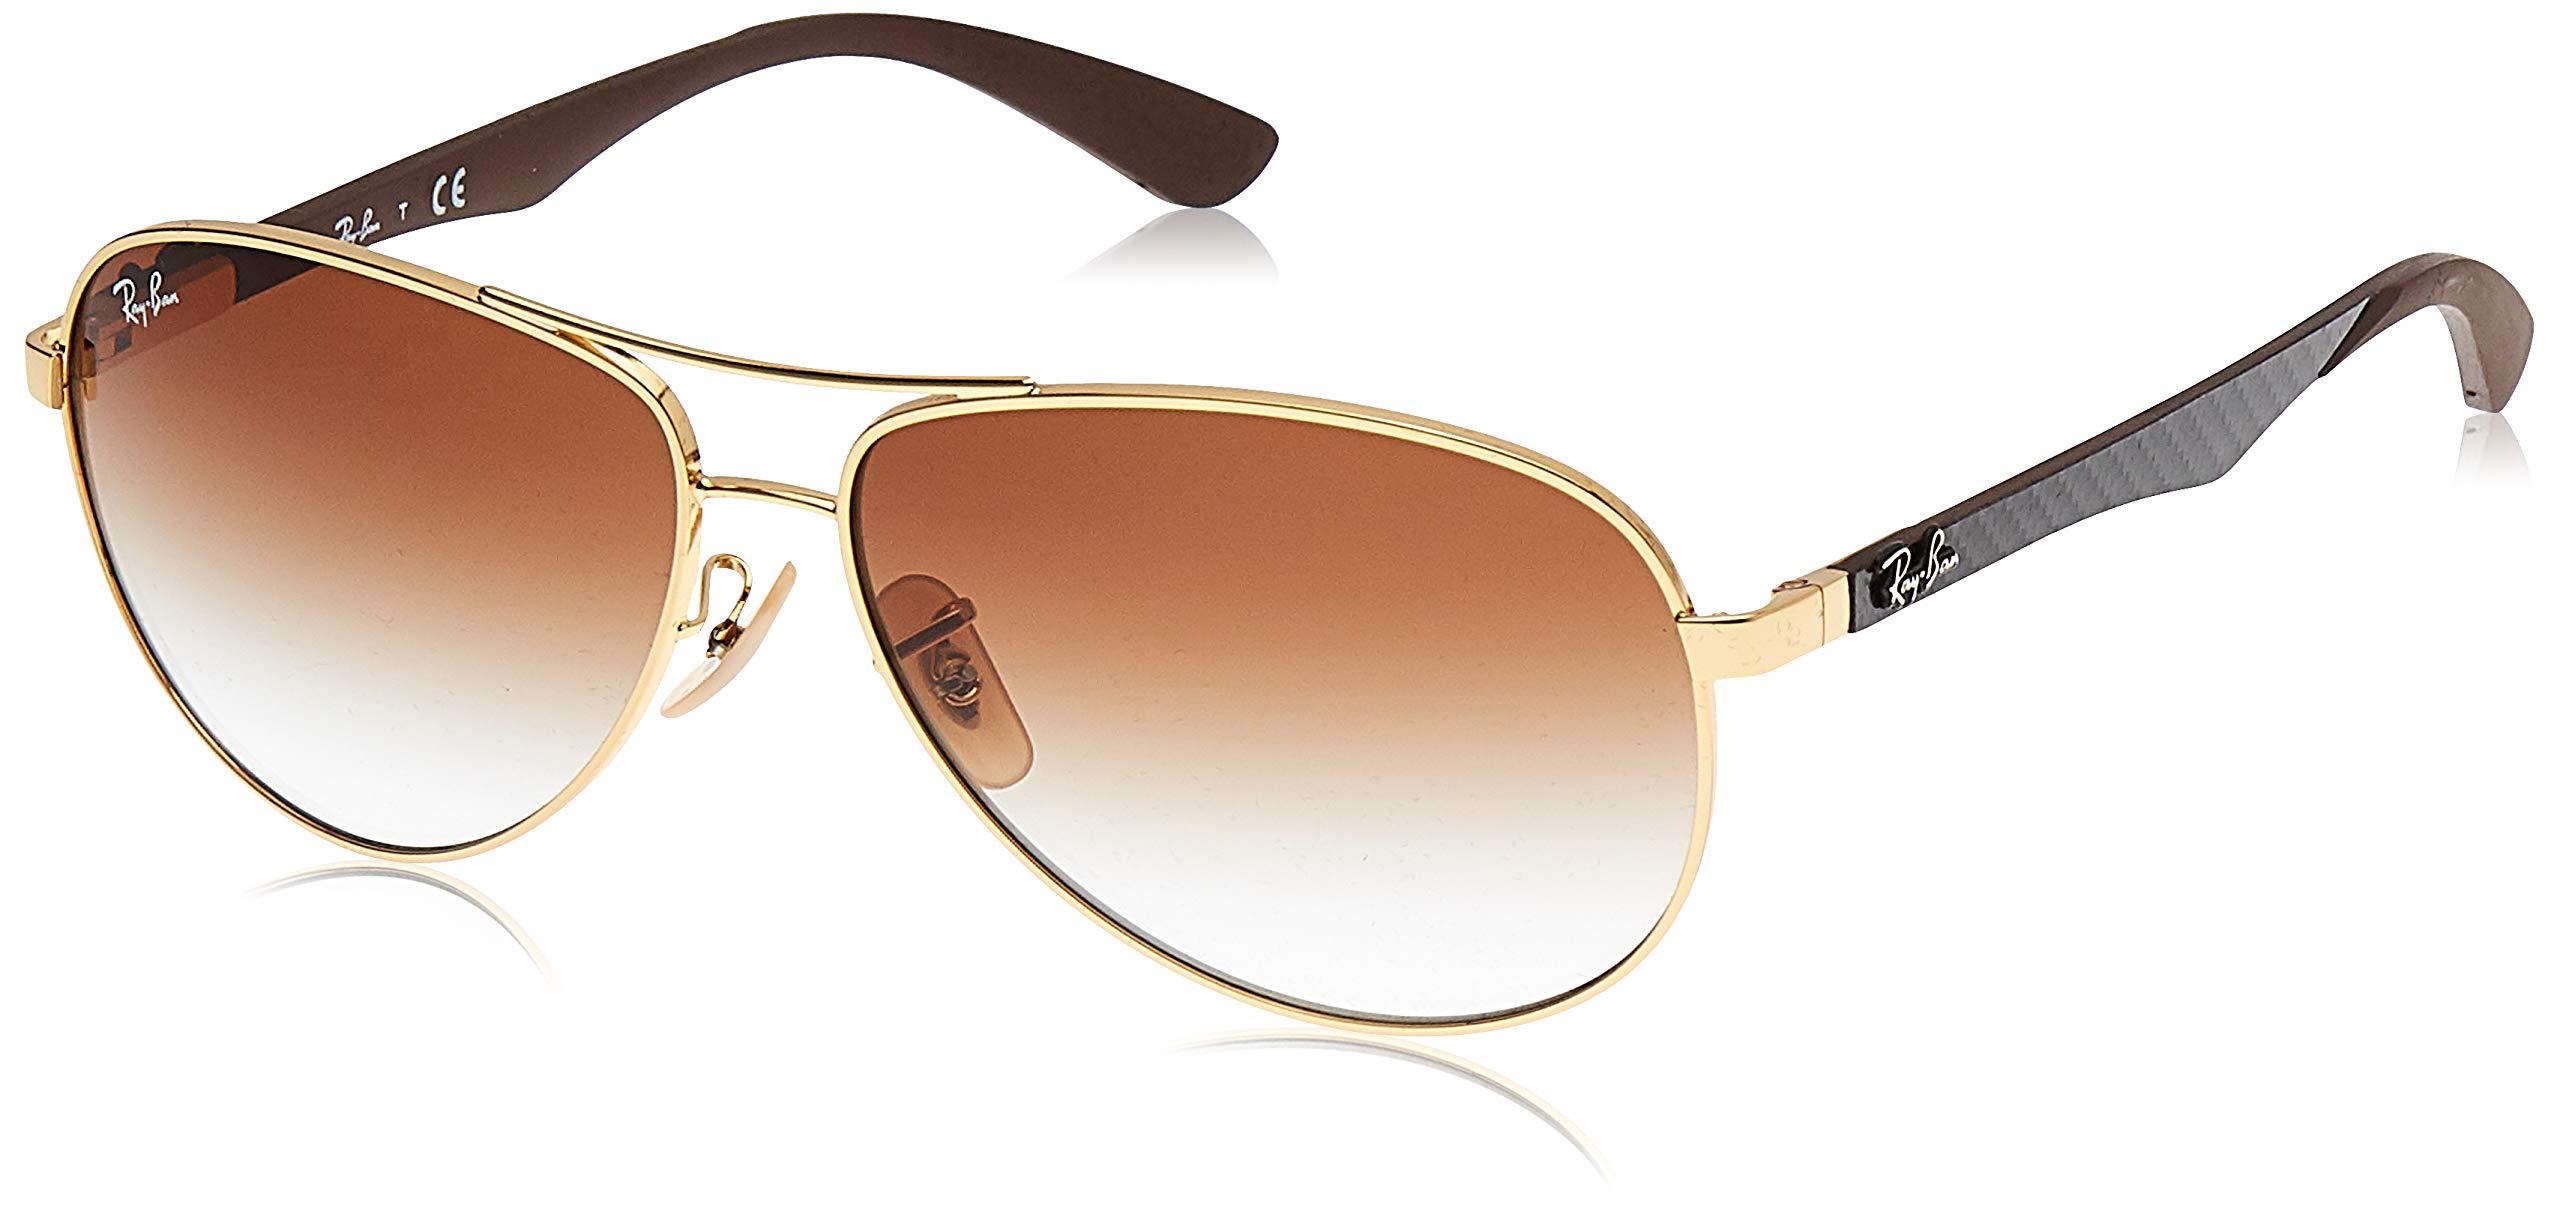 Ray-Ban Rb8313 Aviator Carbon Fiber Sunglasses, Gold/brown Gradient, 58 Mm  - Save 50% - Lyst